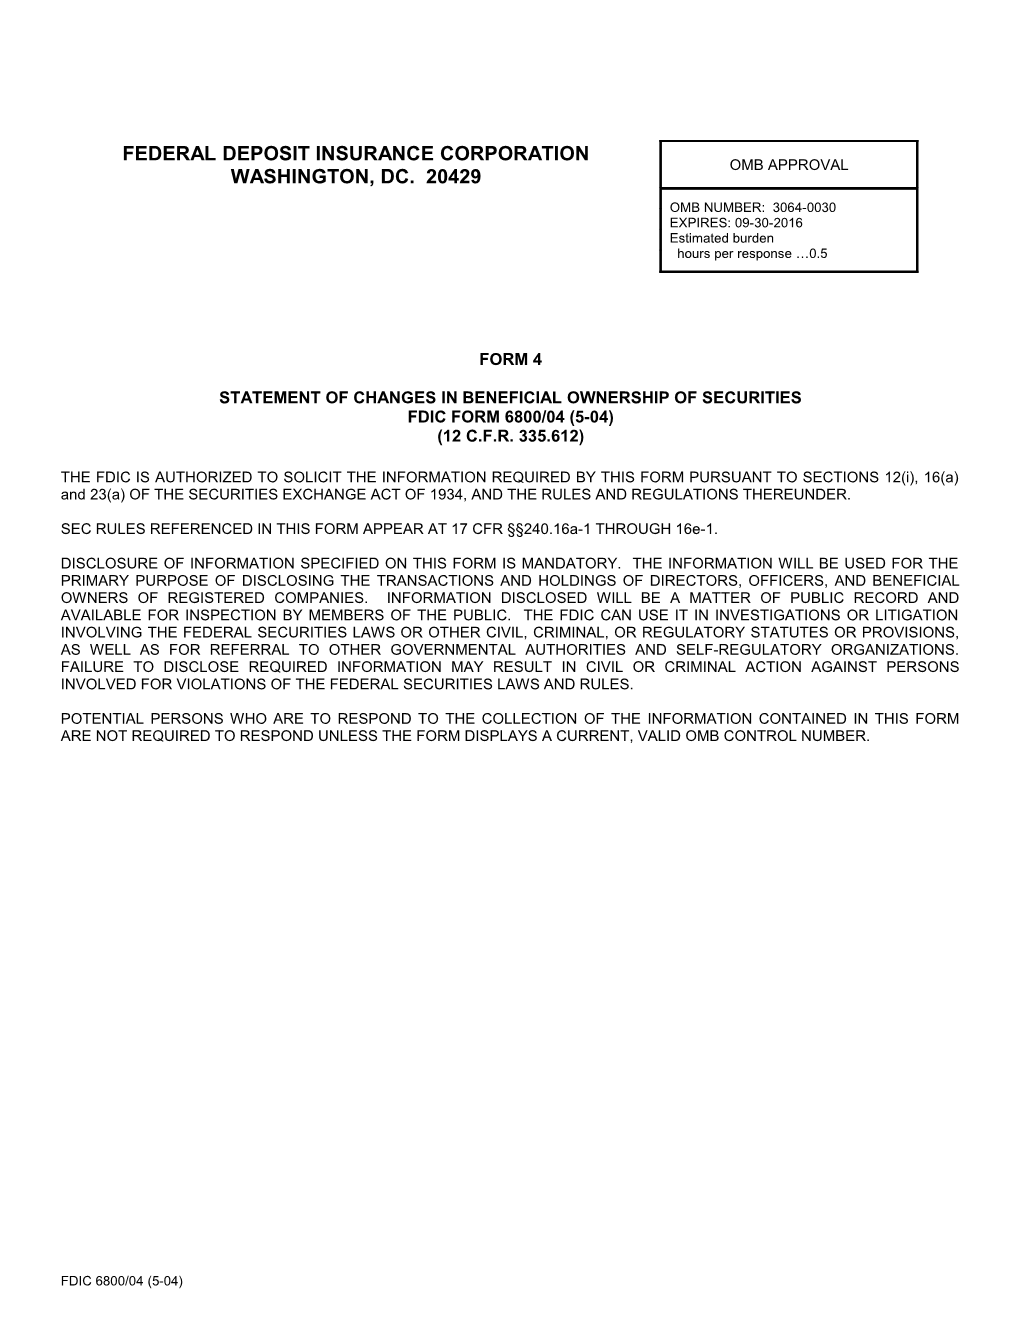 Statement of Changes in Beneficial Ownership (Form F-8)